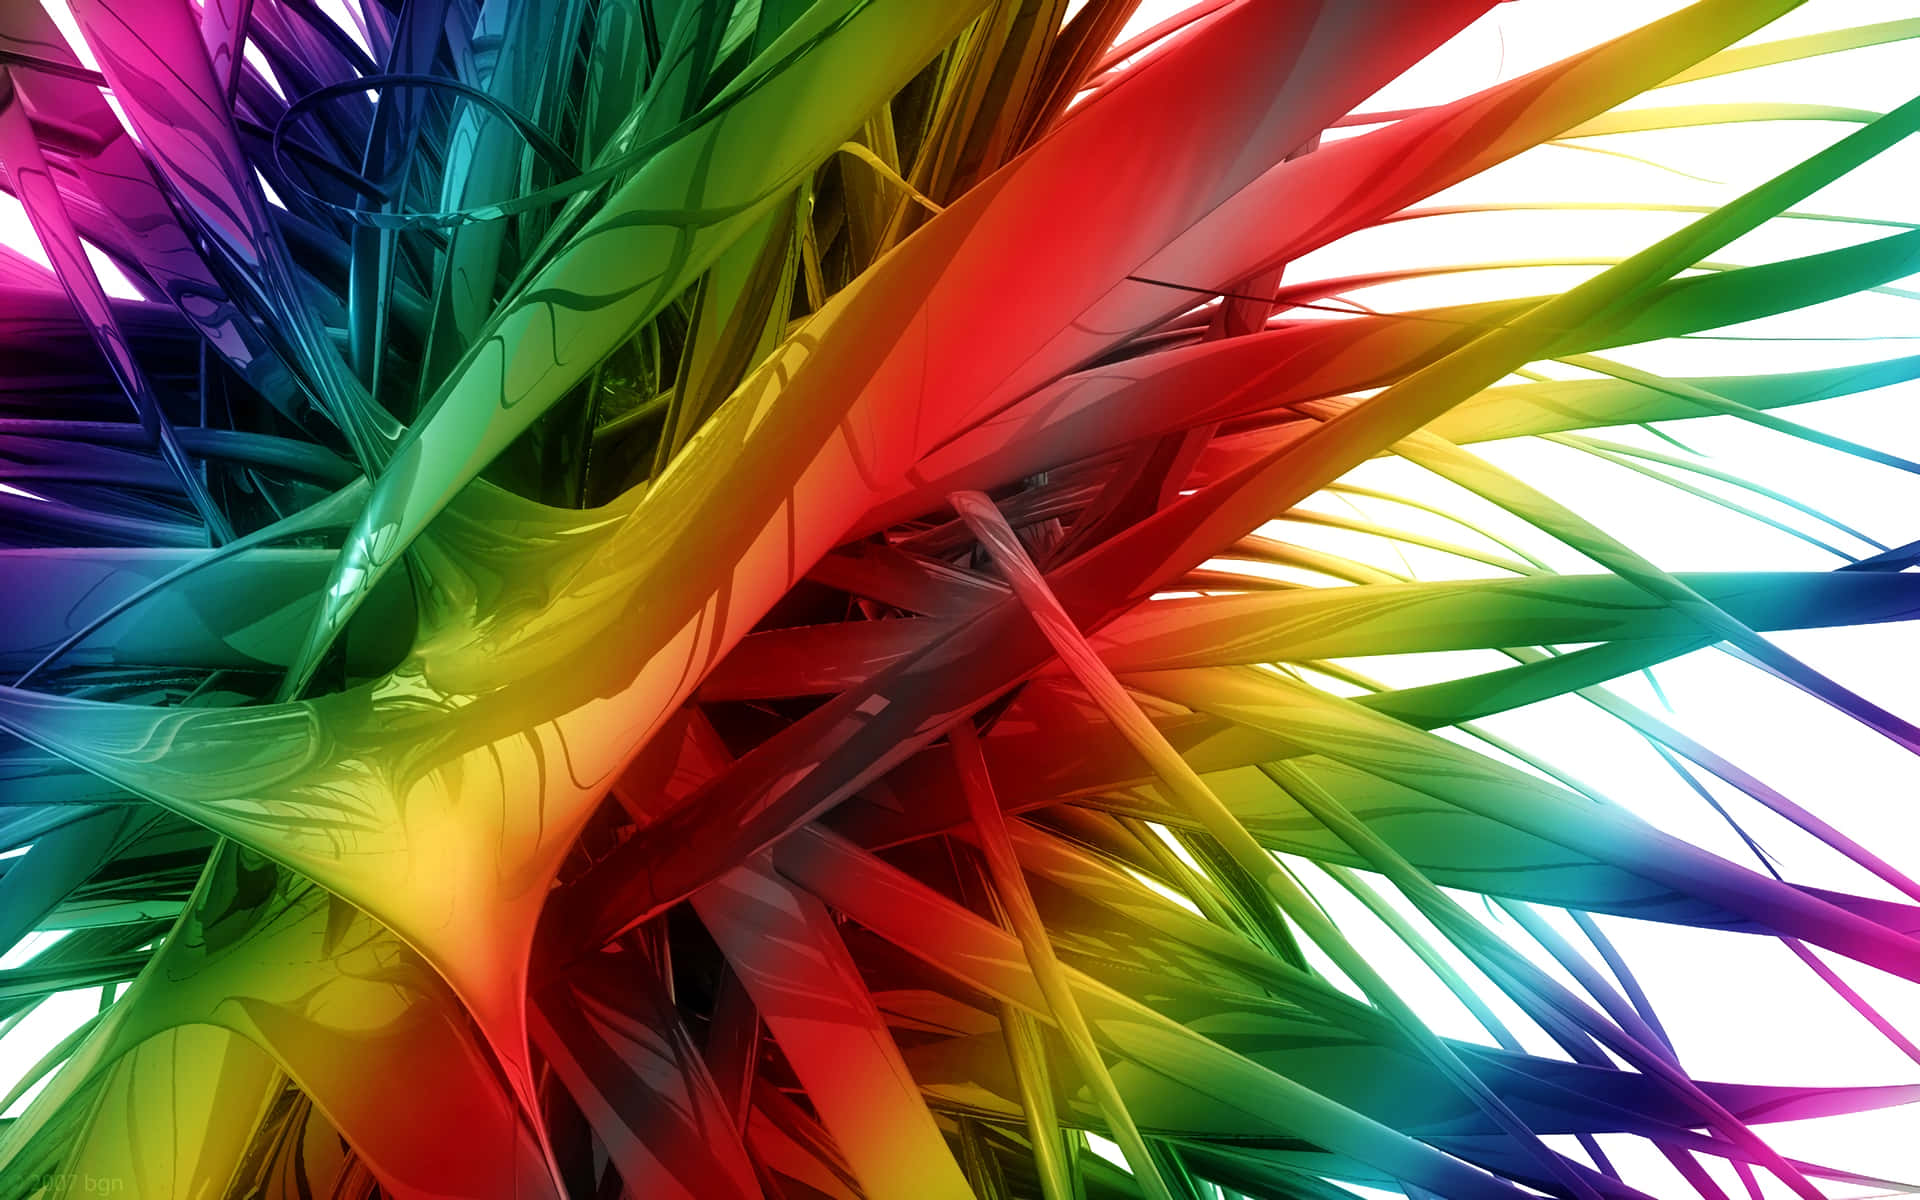 Spikes Of Paint In Colorful Abstract Art Wallpaper